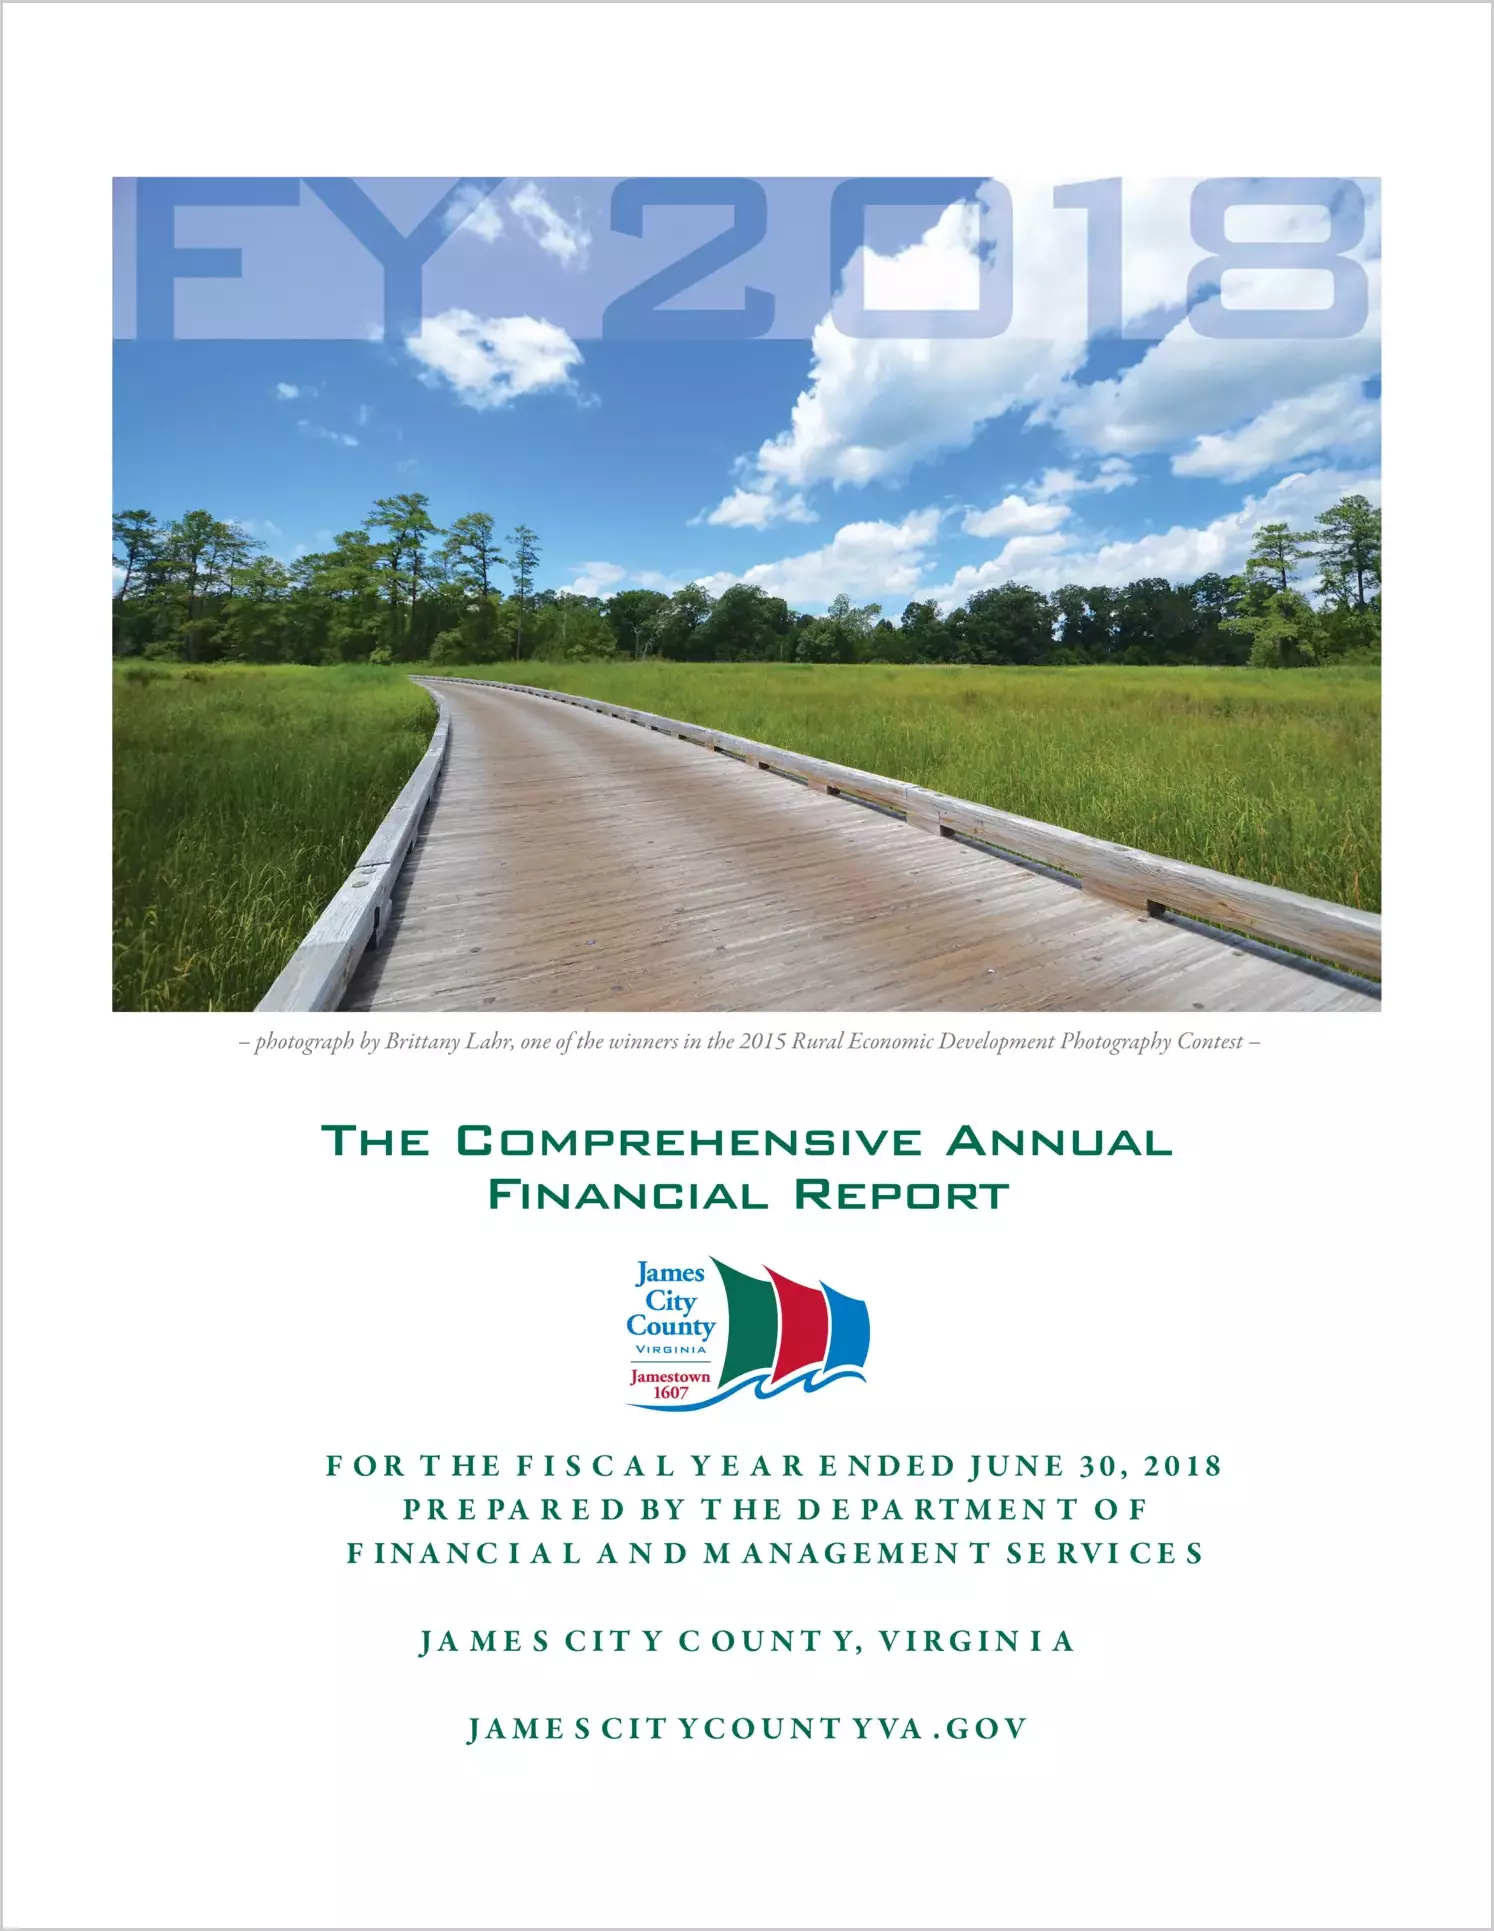 2018 Annual Financial Report for County of James City